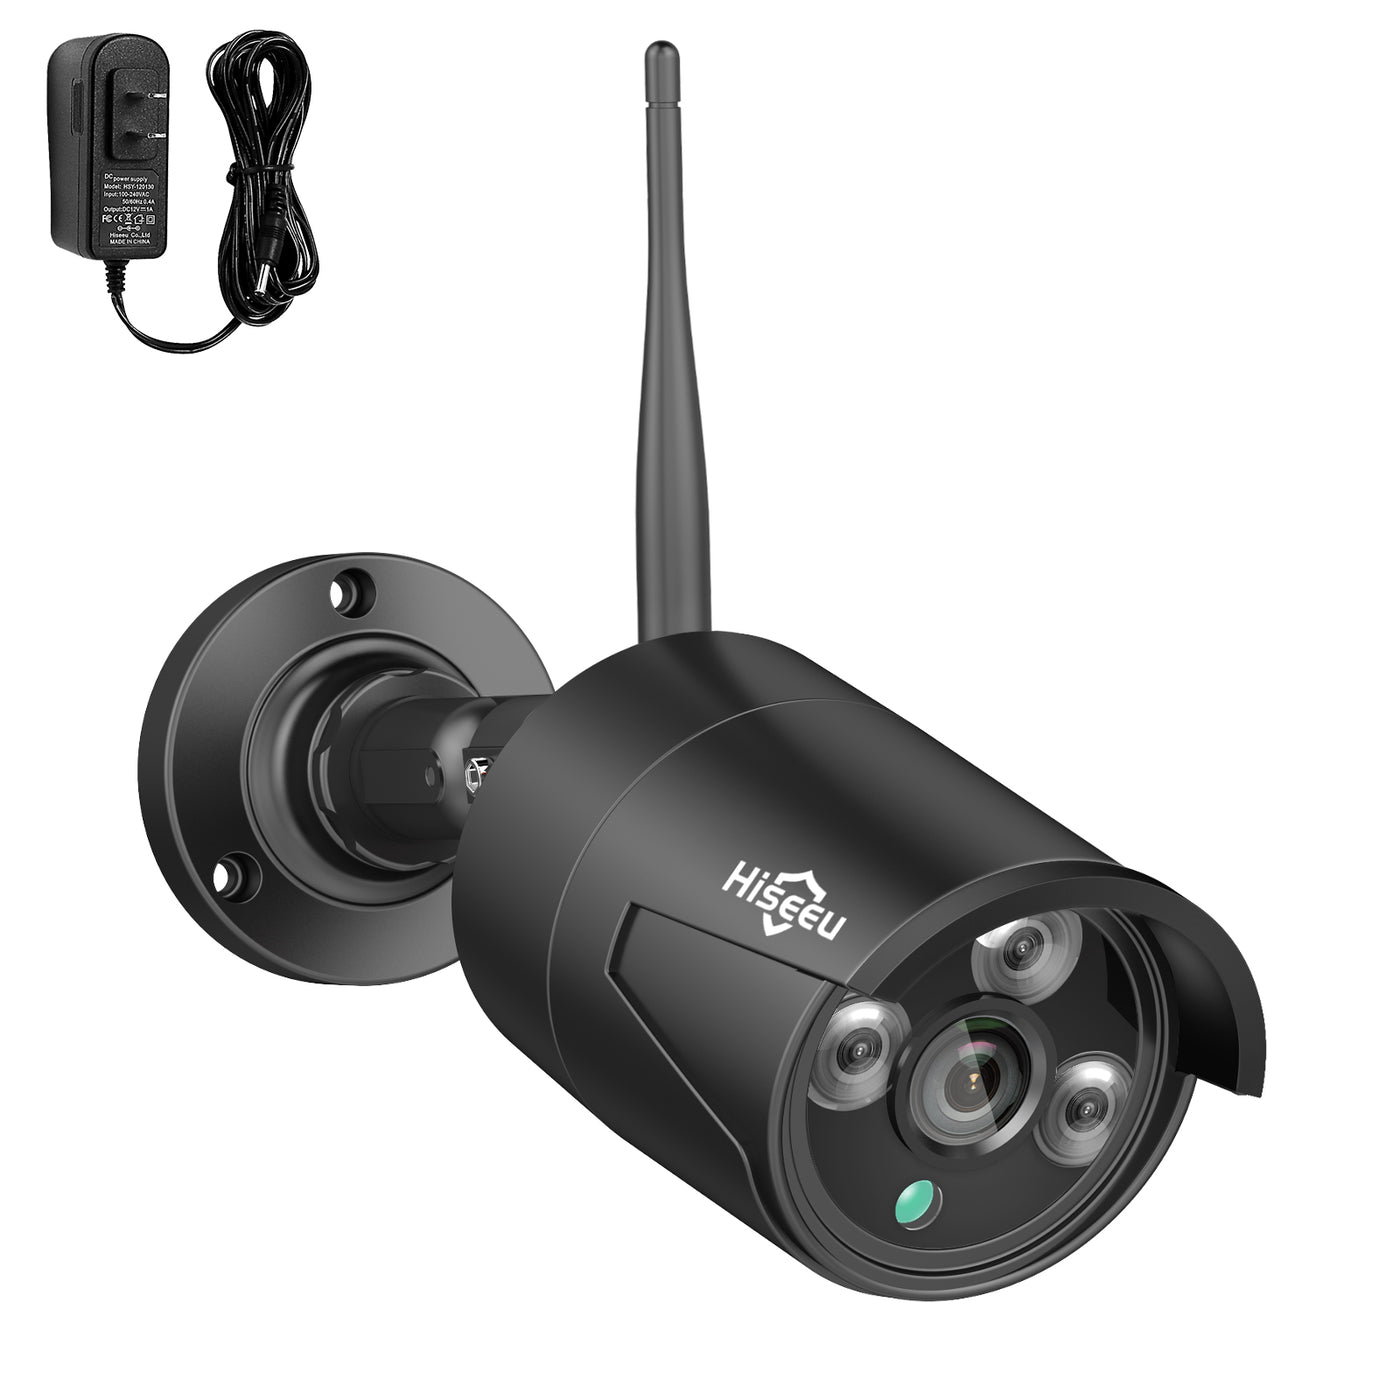 5MP Black Camera Add on 5MP Security Camera, Waterproof Outdoor Indoor 3.6mm Lens IP Day & Night Vision with DC 12V Power Adapter Compatible 10CH 5MP WiFi Camera System